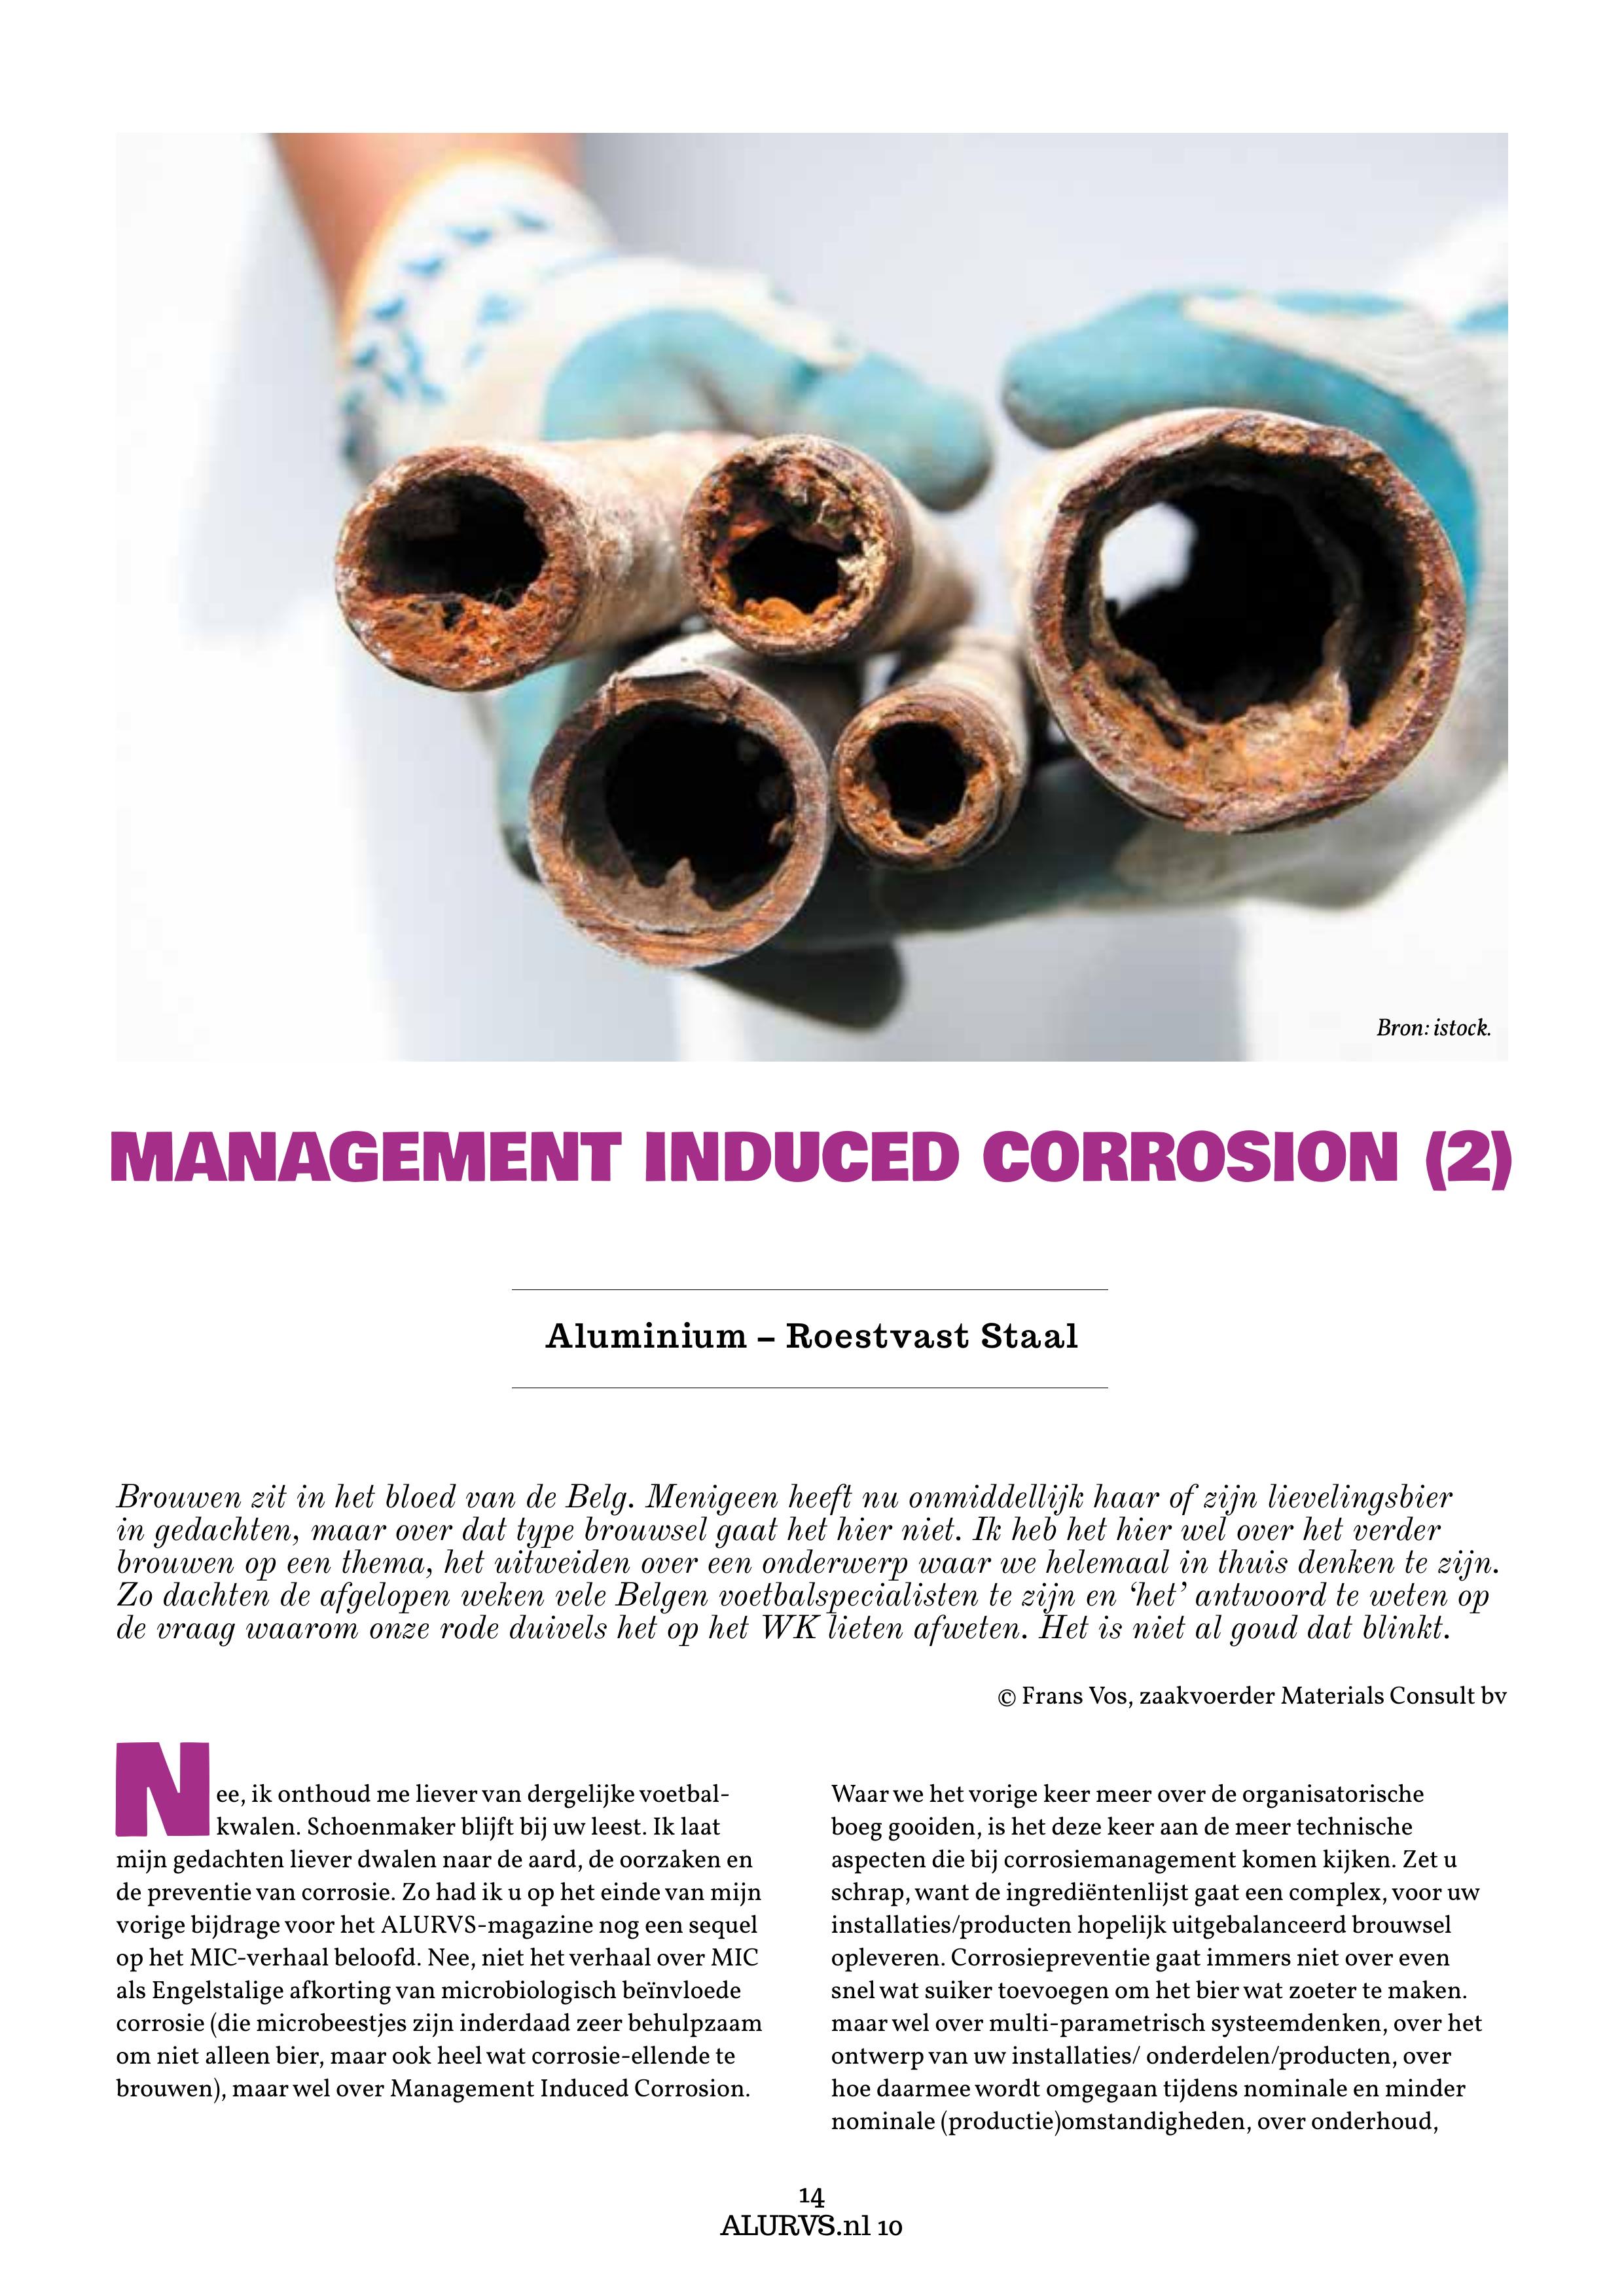 Management Induced Corrosion (2), ALURVS.nl 10-2022